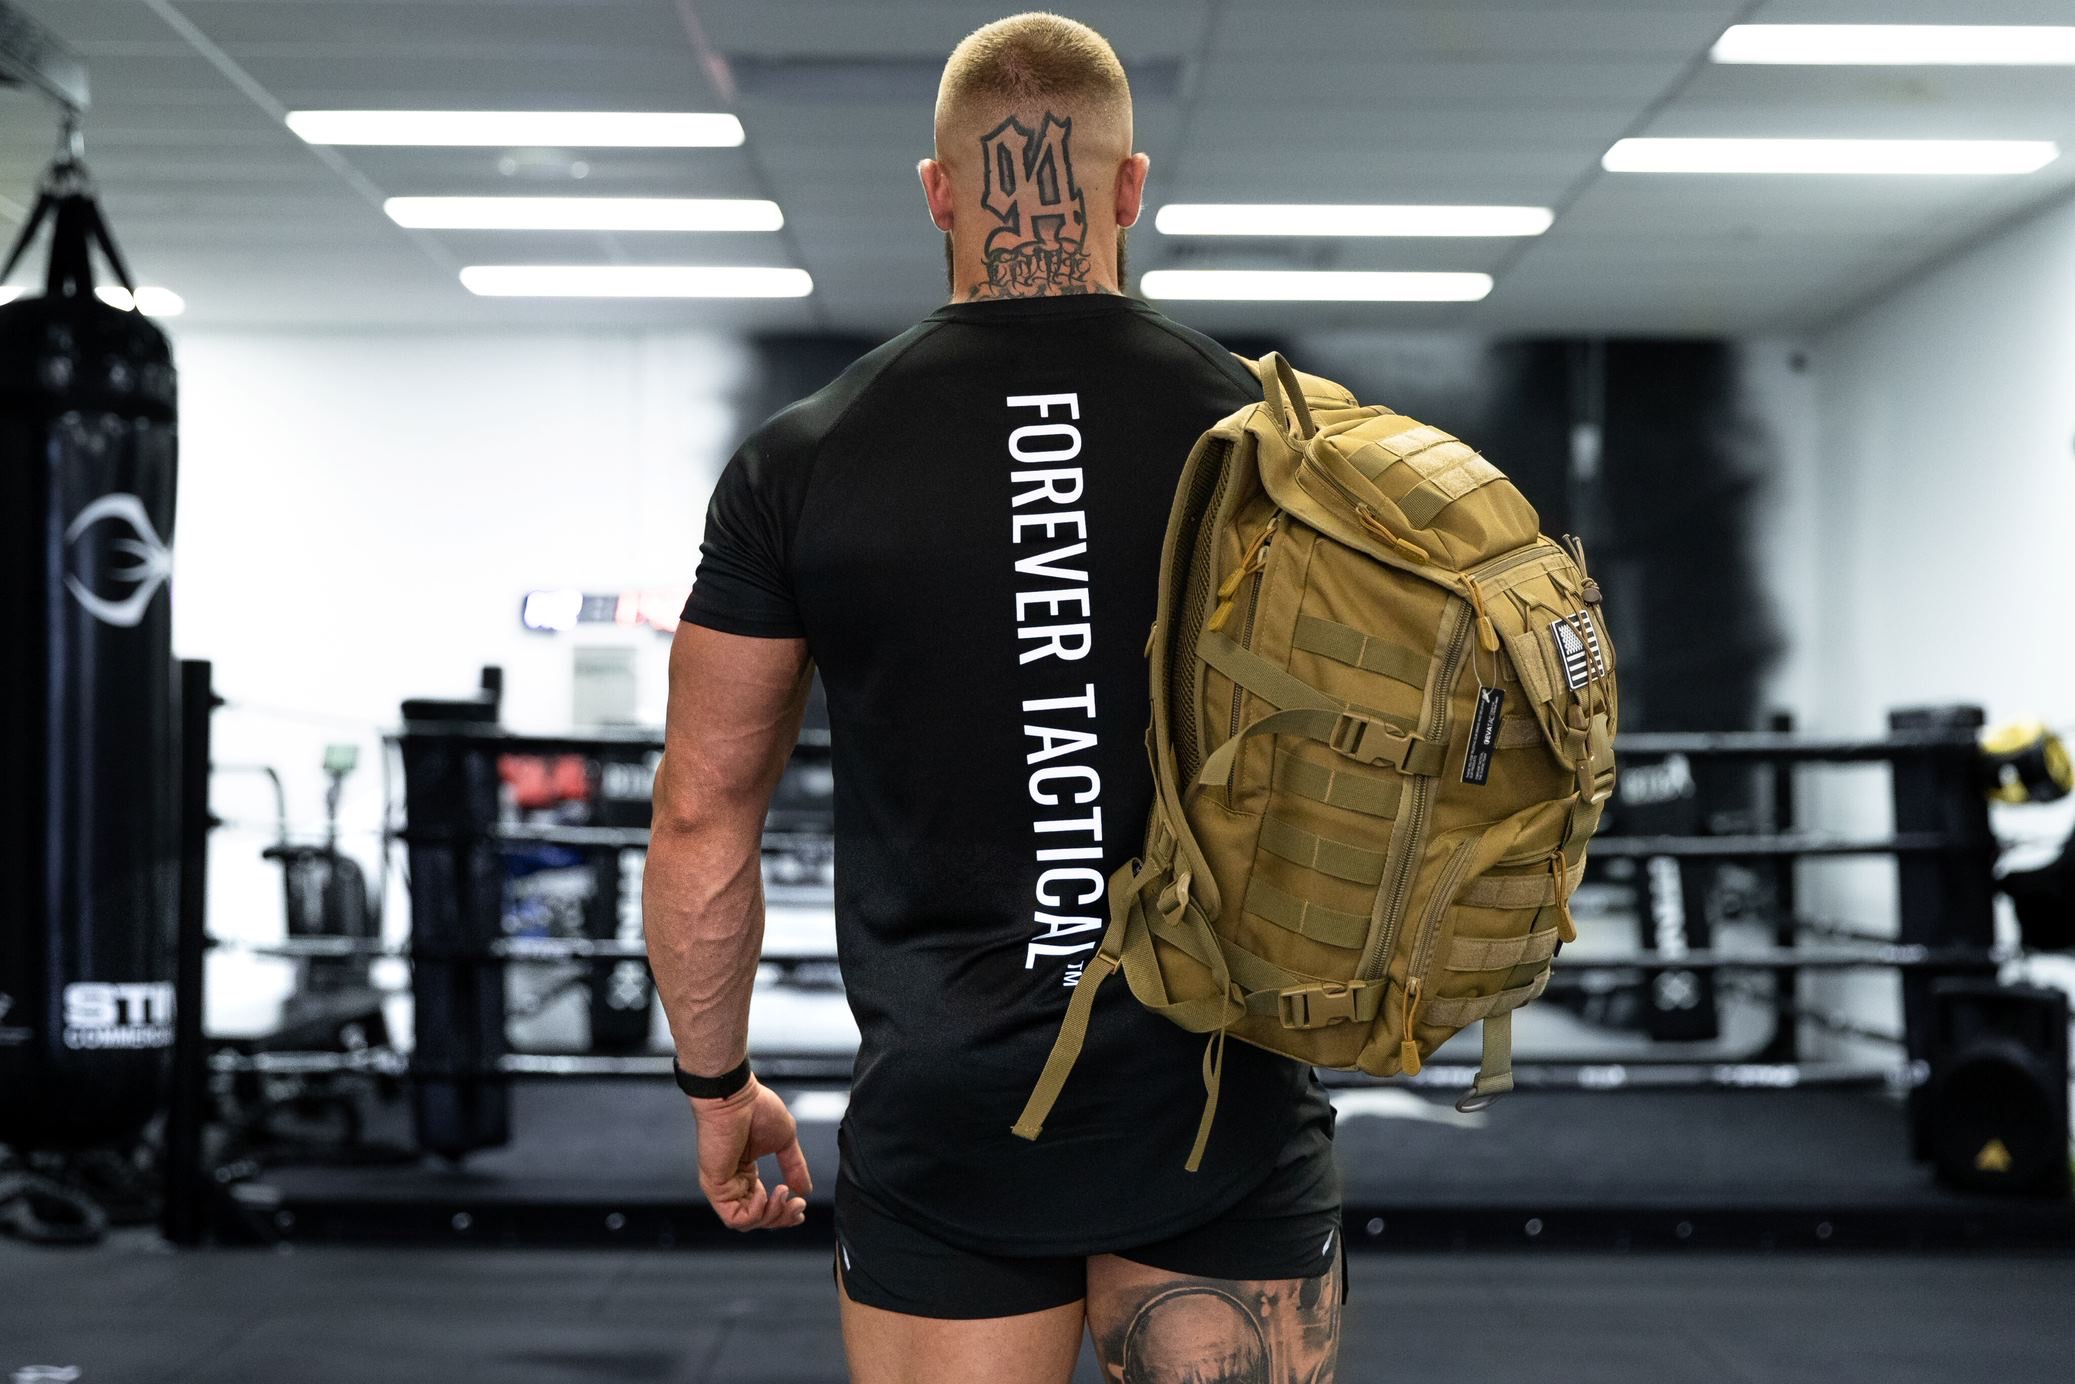 workout backpacks, workout routine, gym accessories, medium sized bag, nylon bags, self locking combination lockers,dedicated shoe compartment, gym wear, water bottle pocket, lightweight bags, overnight bag, packing cubes, separate space, shoe pocket, weight lifting, main compartment, wet towel, locker room